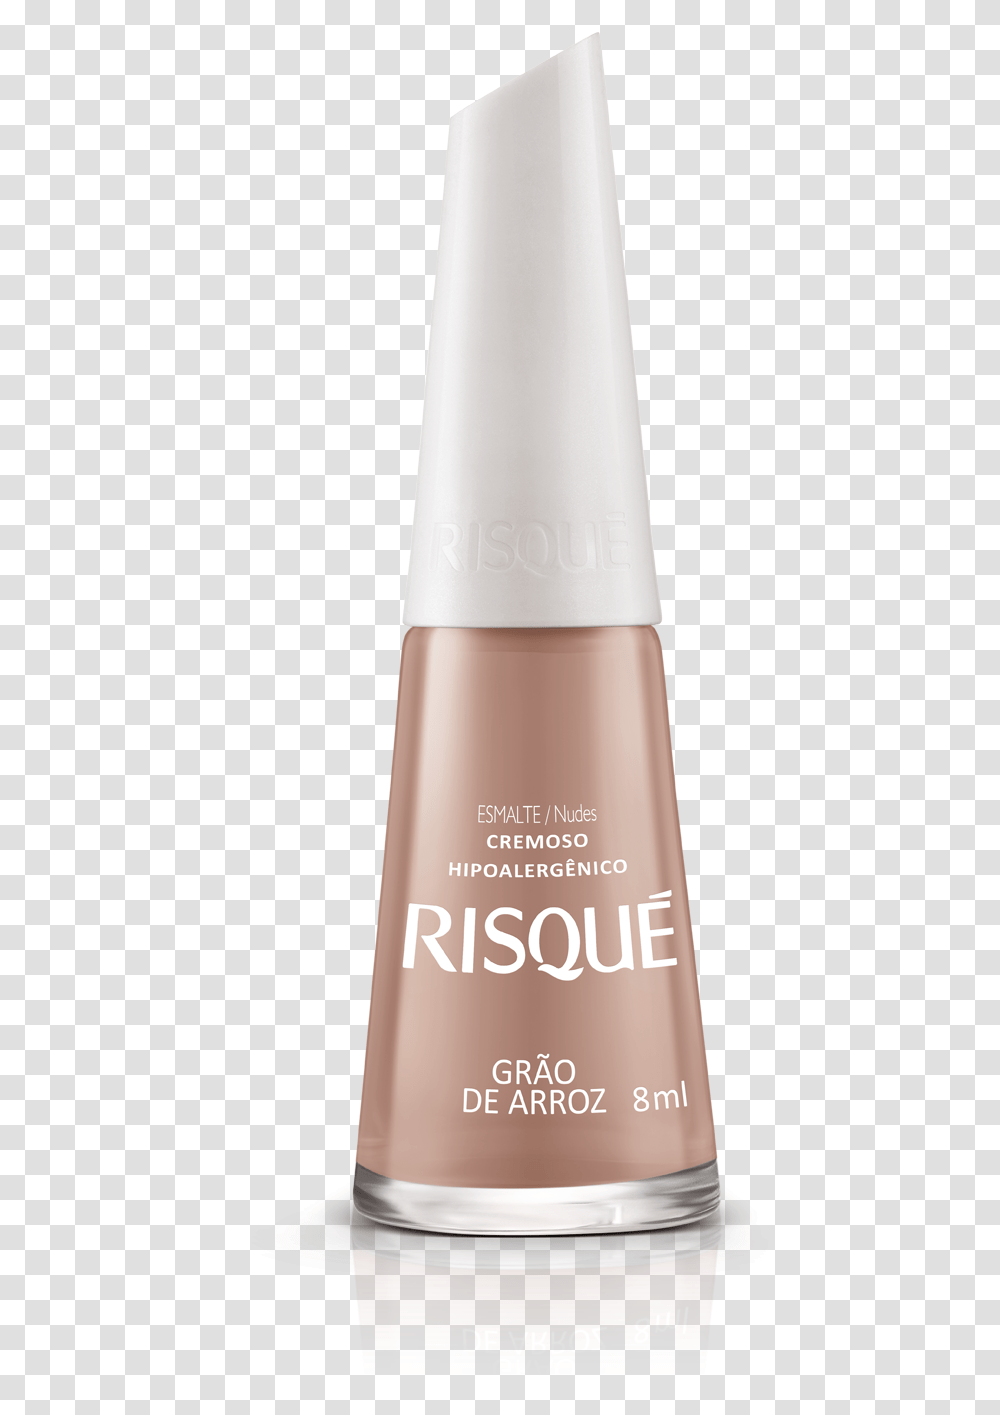 Risque, Cosmetics, Bottle, Beer, Alcohol Transparent Png